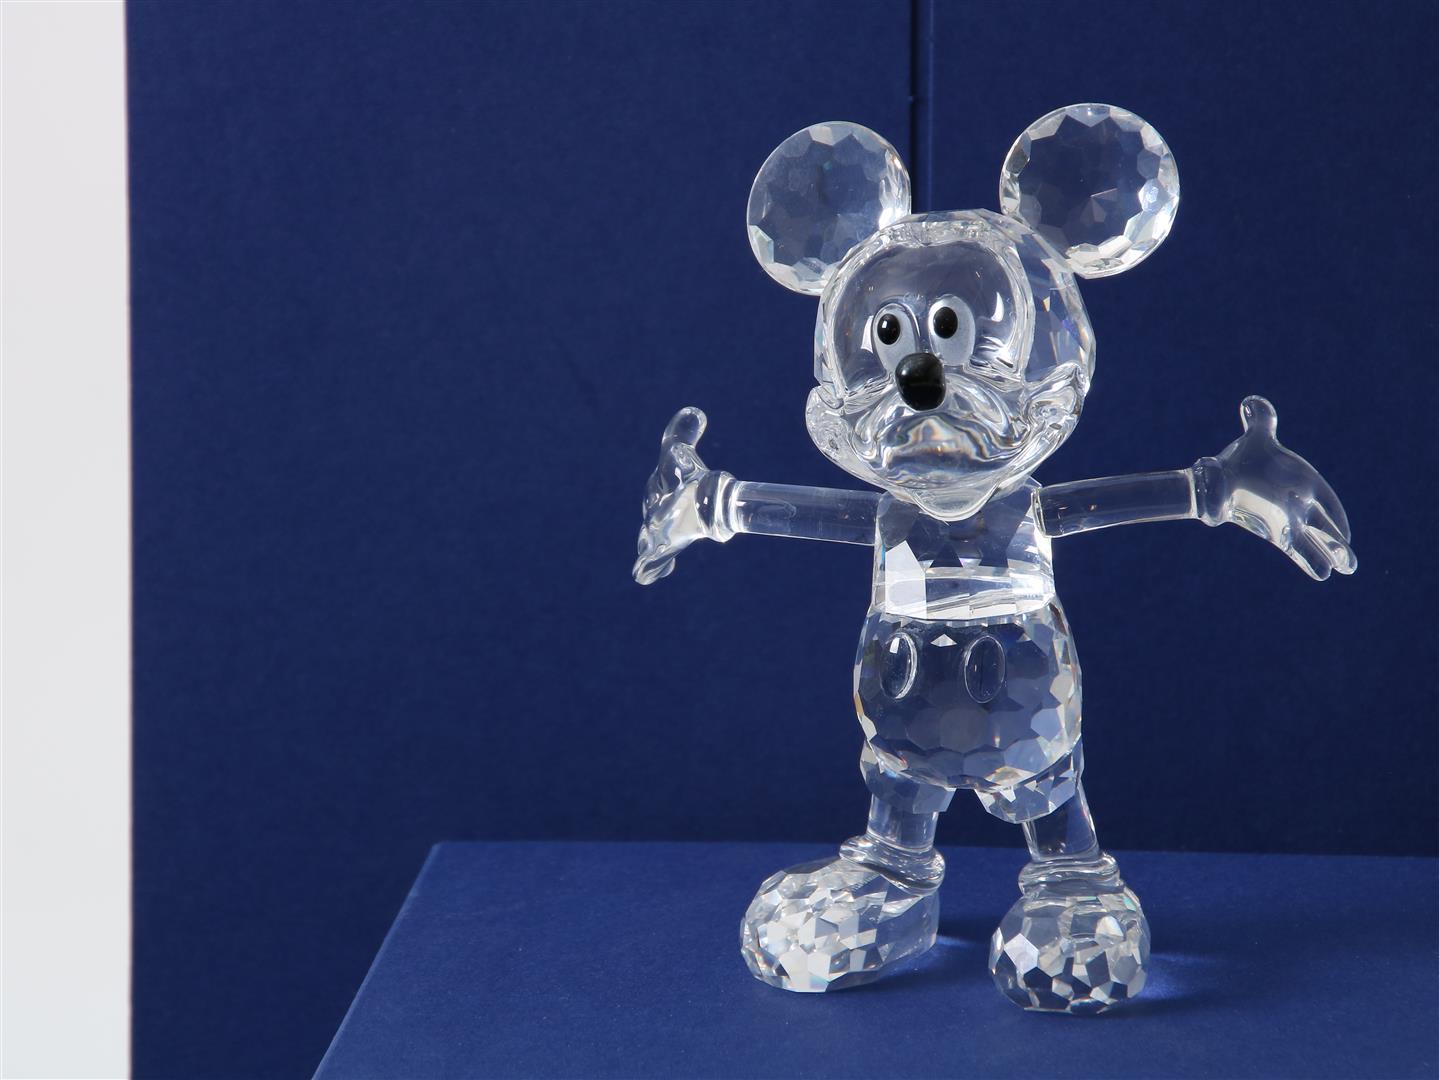 Series of 6 Swarovski crystal sculptures, Disney Showcase Collection, Donald Duck, Daisy Duck, - Image 9 of 11